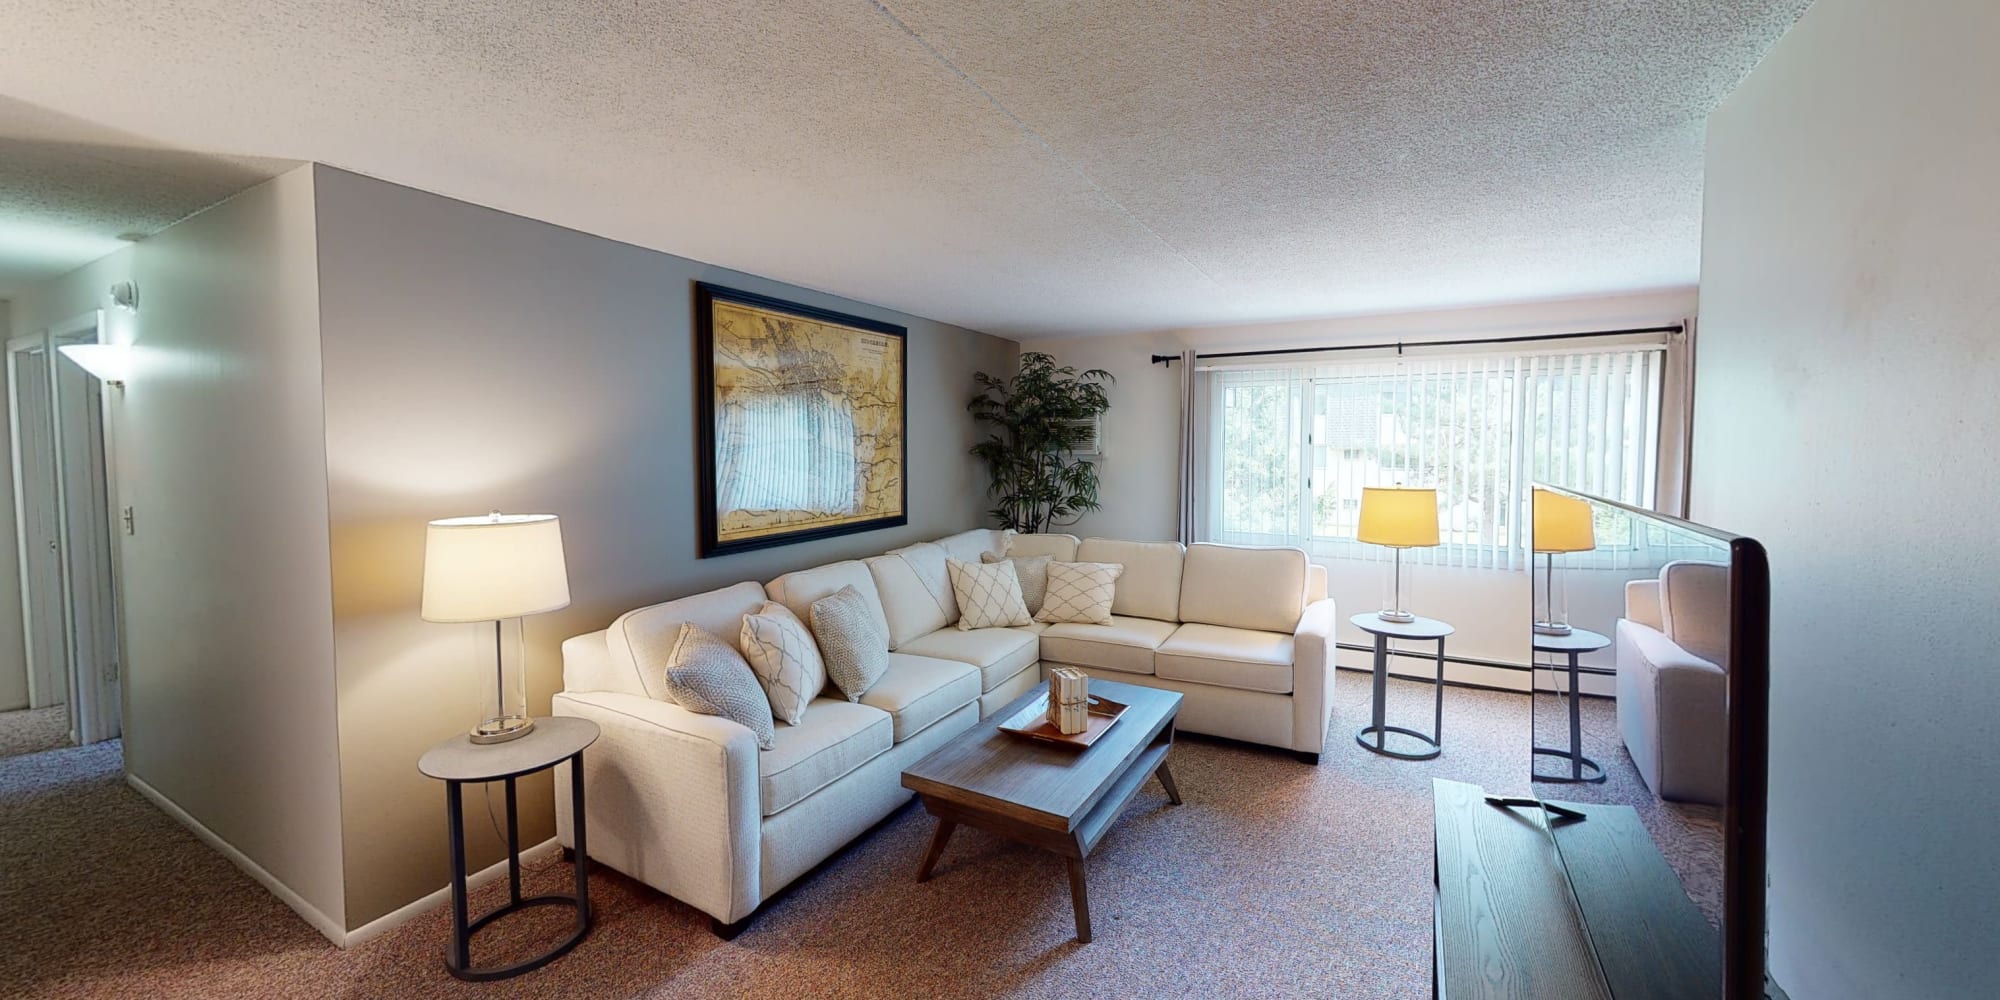 Living room with TV at Tanglewood Apartments & Townhomes in Erie, Pennsylvania